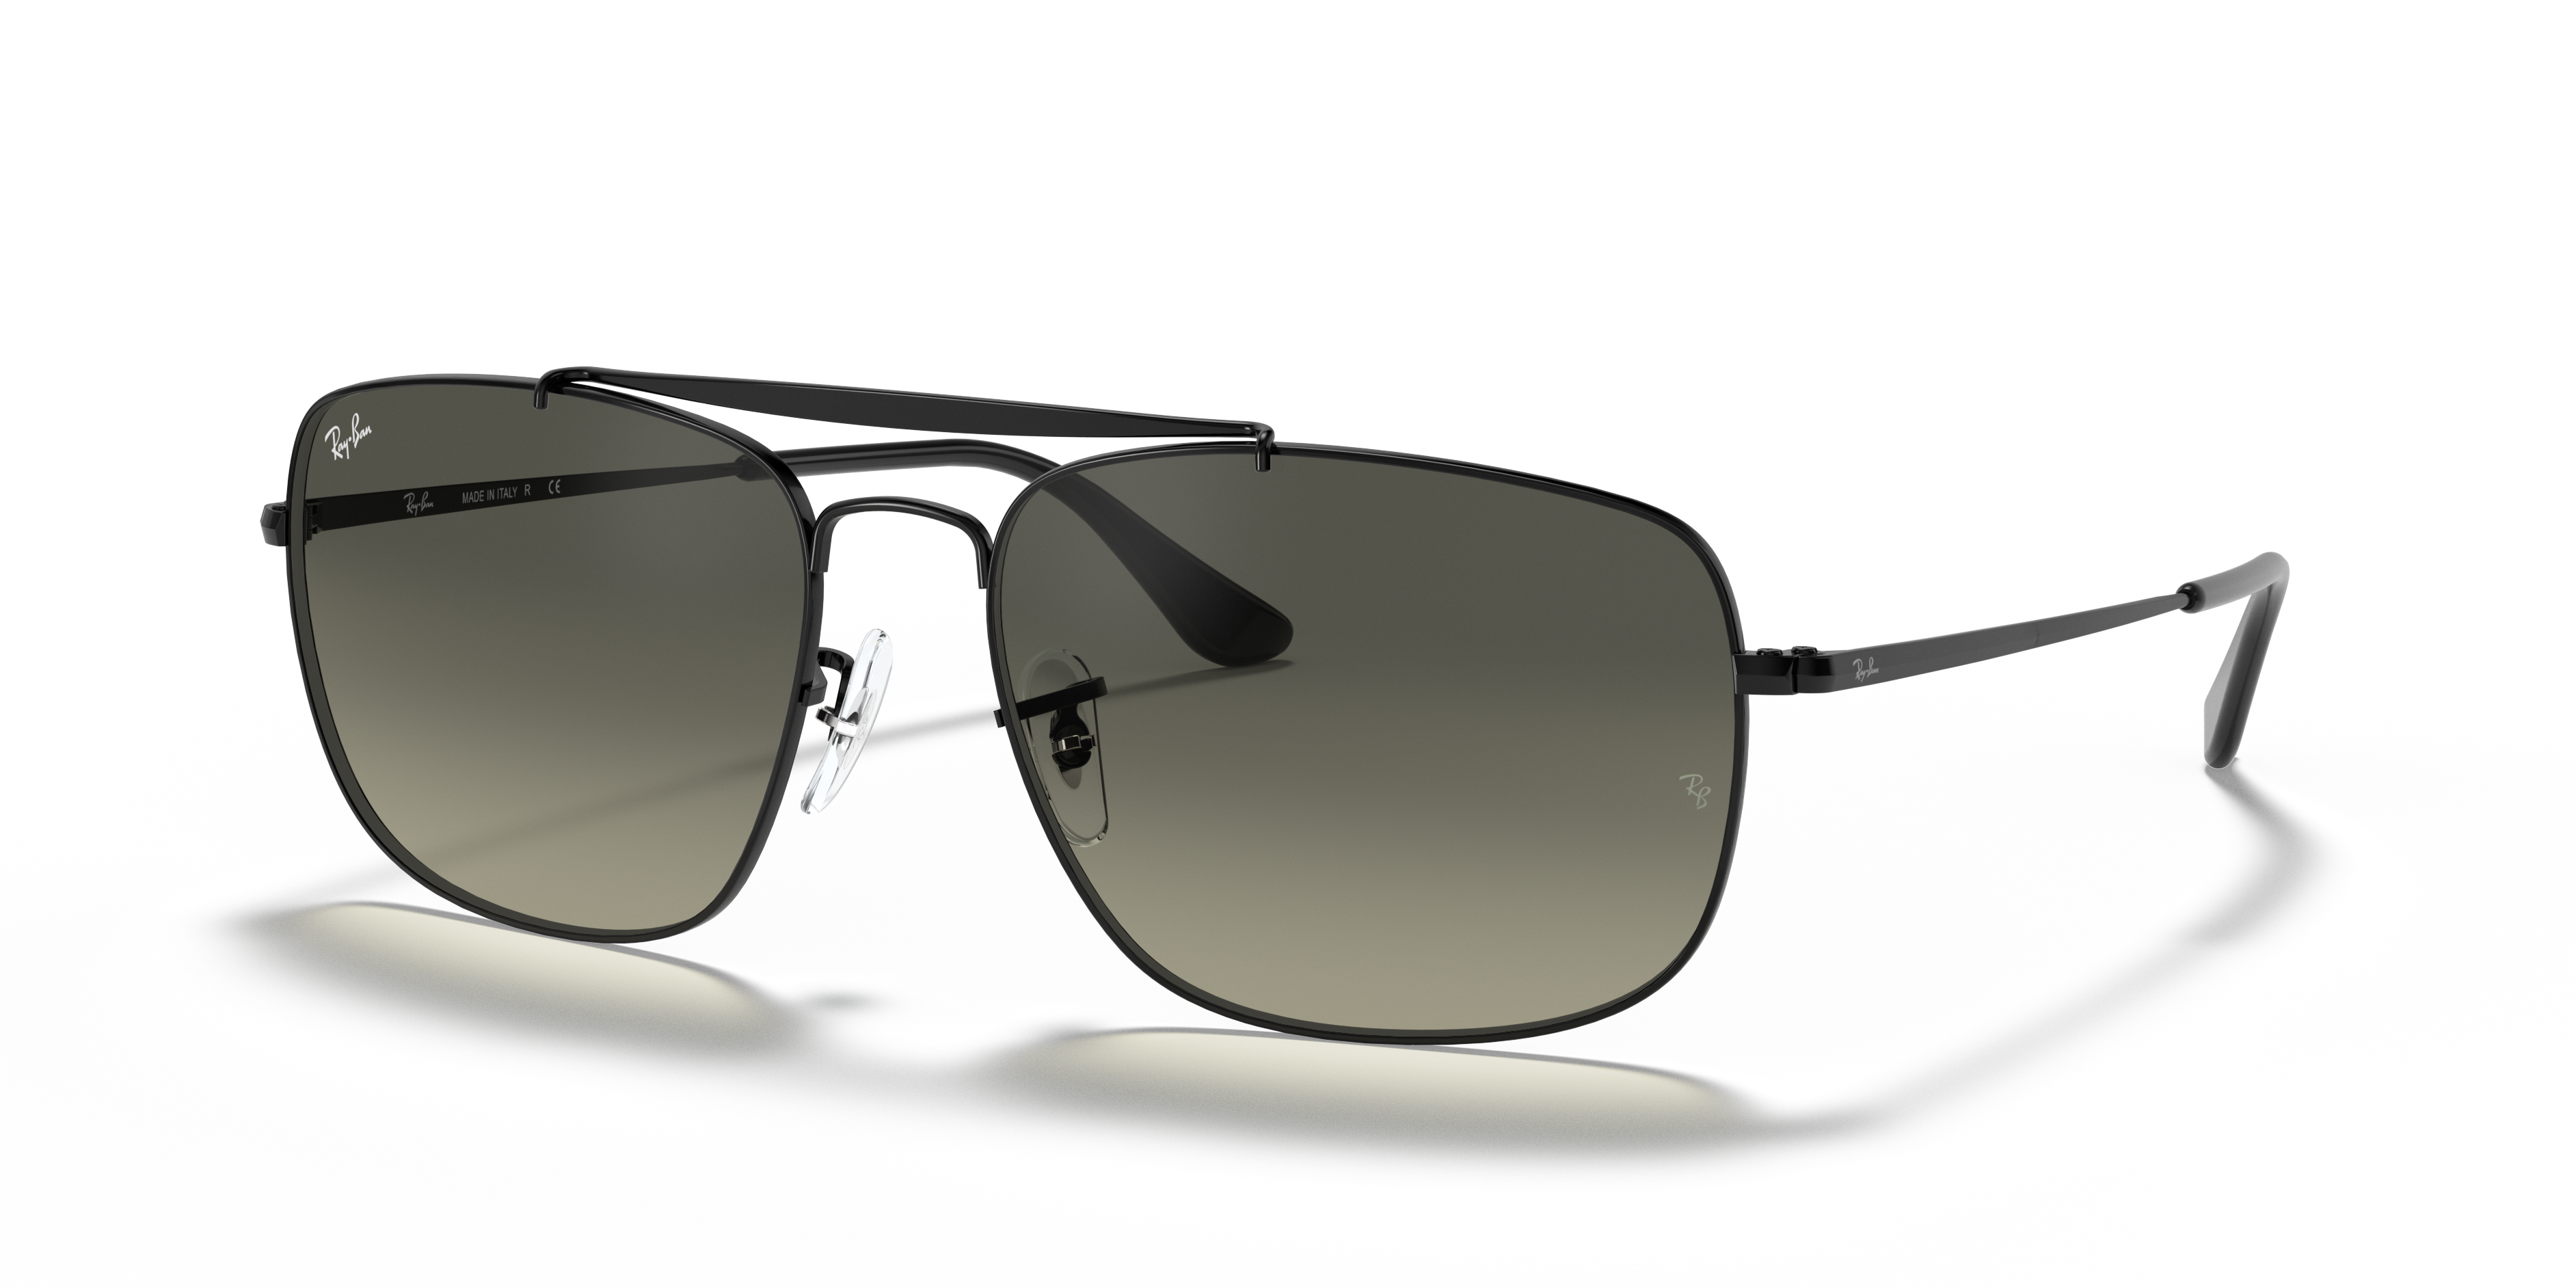 COLONEL Sunglasses in Black and Grey - RB3560 | Ray-Ban® US